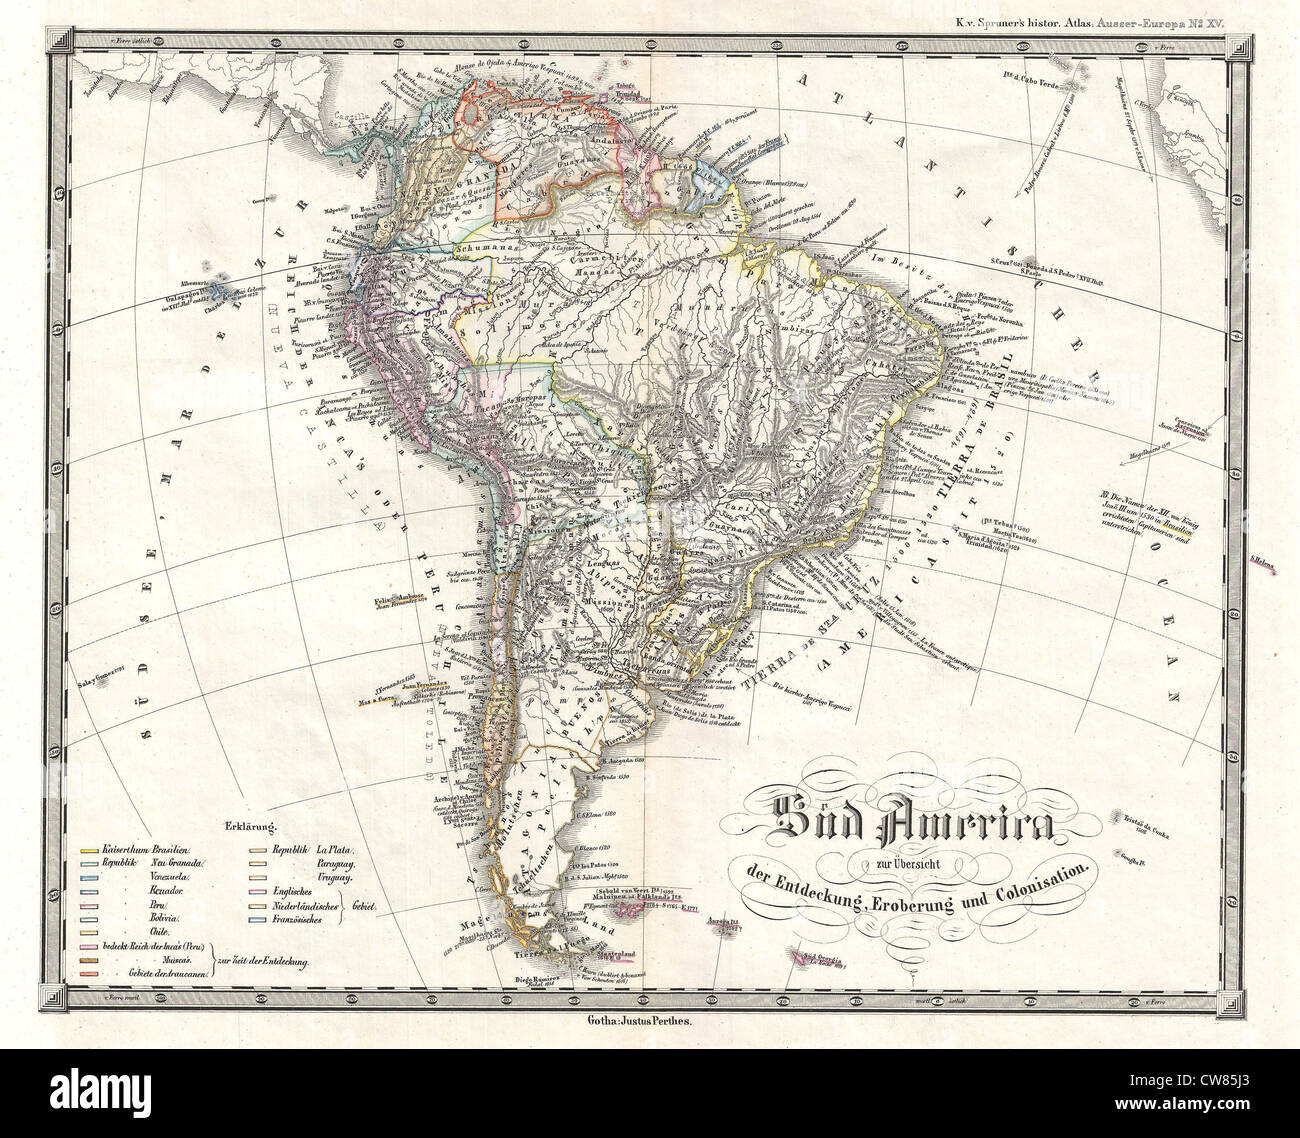 1855 Spruner Map of South America - Overview of Discovery, Conquest and Colonization Stock Photo